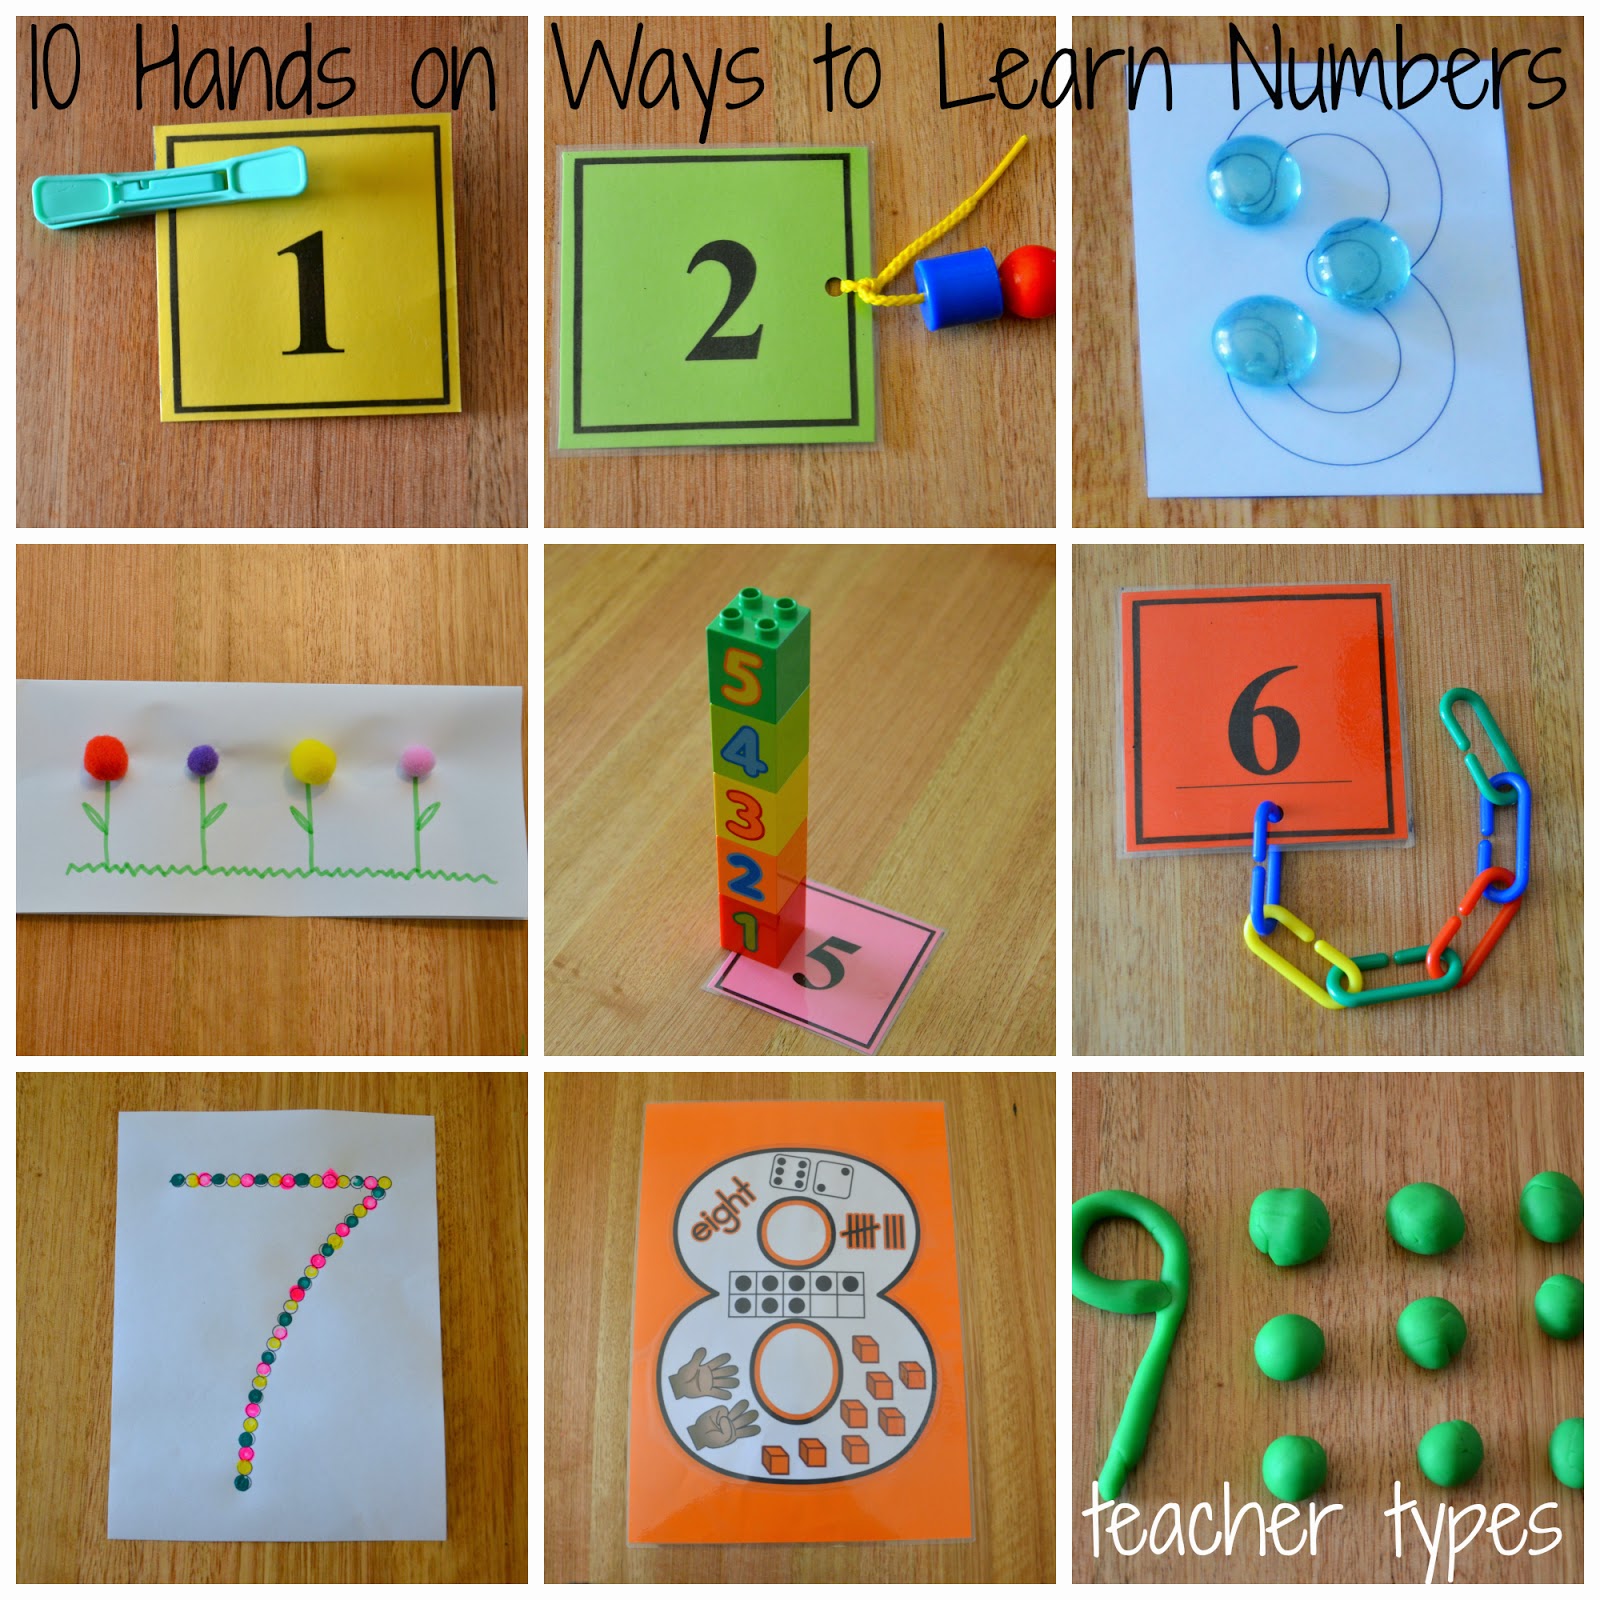 10-hands-on-ways-to-learn-numbers-teacher-types